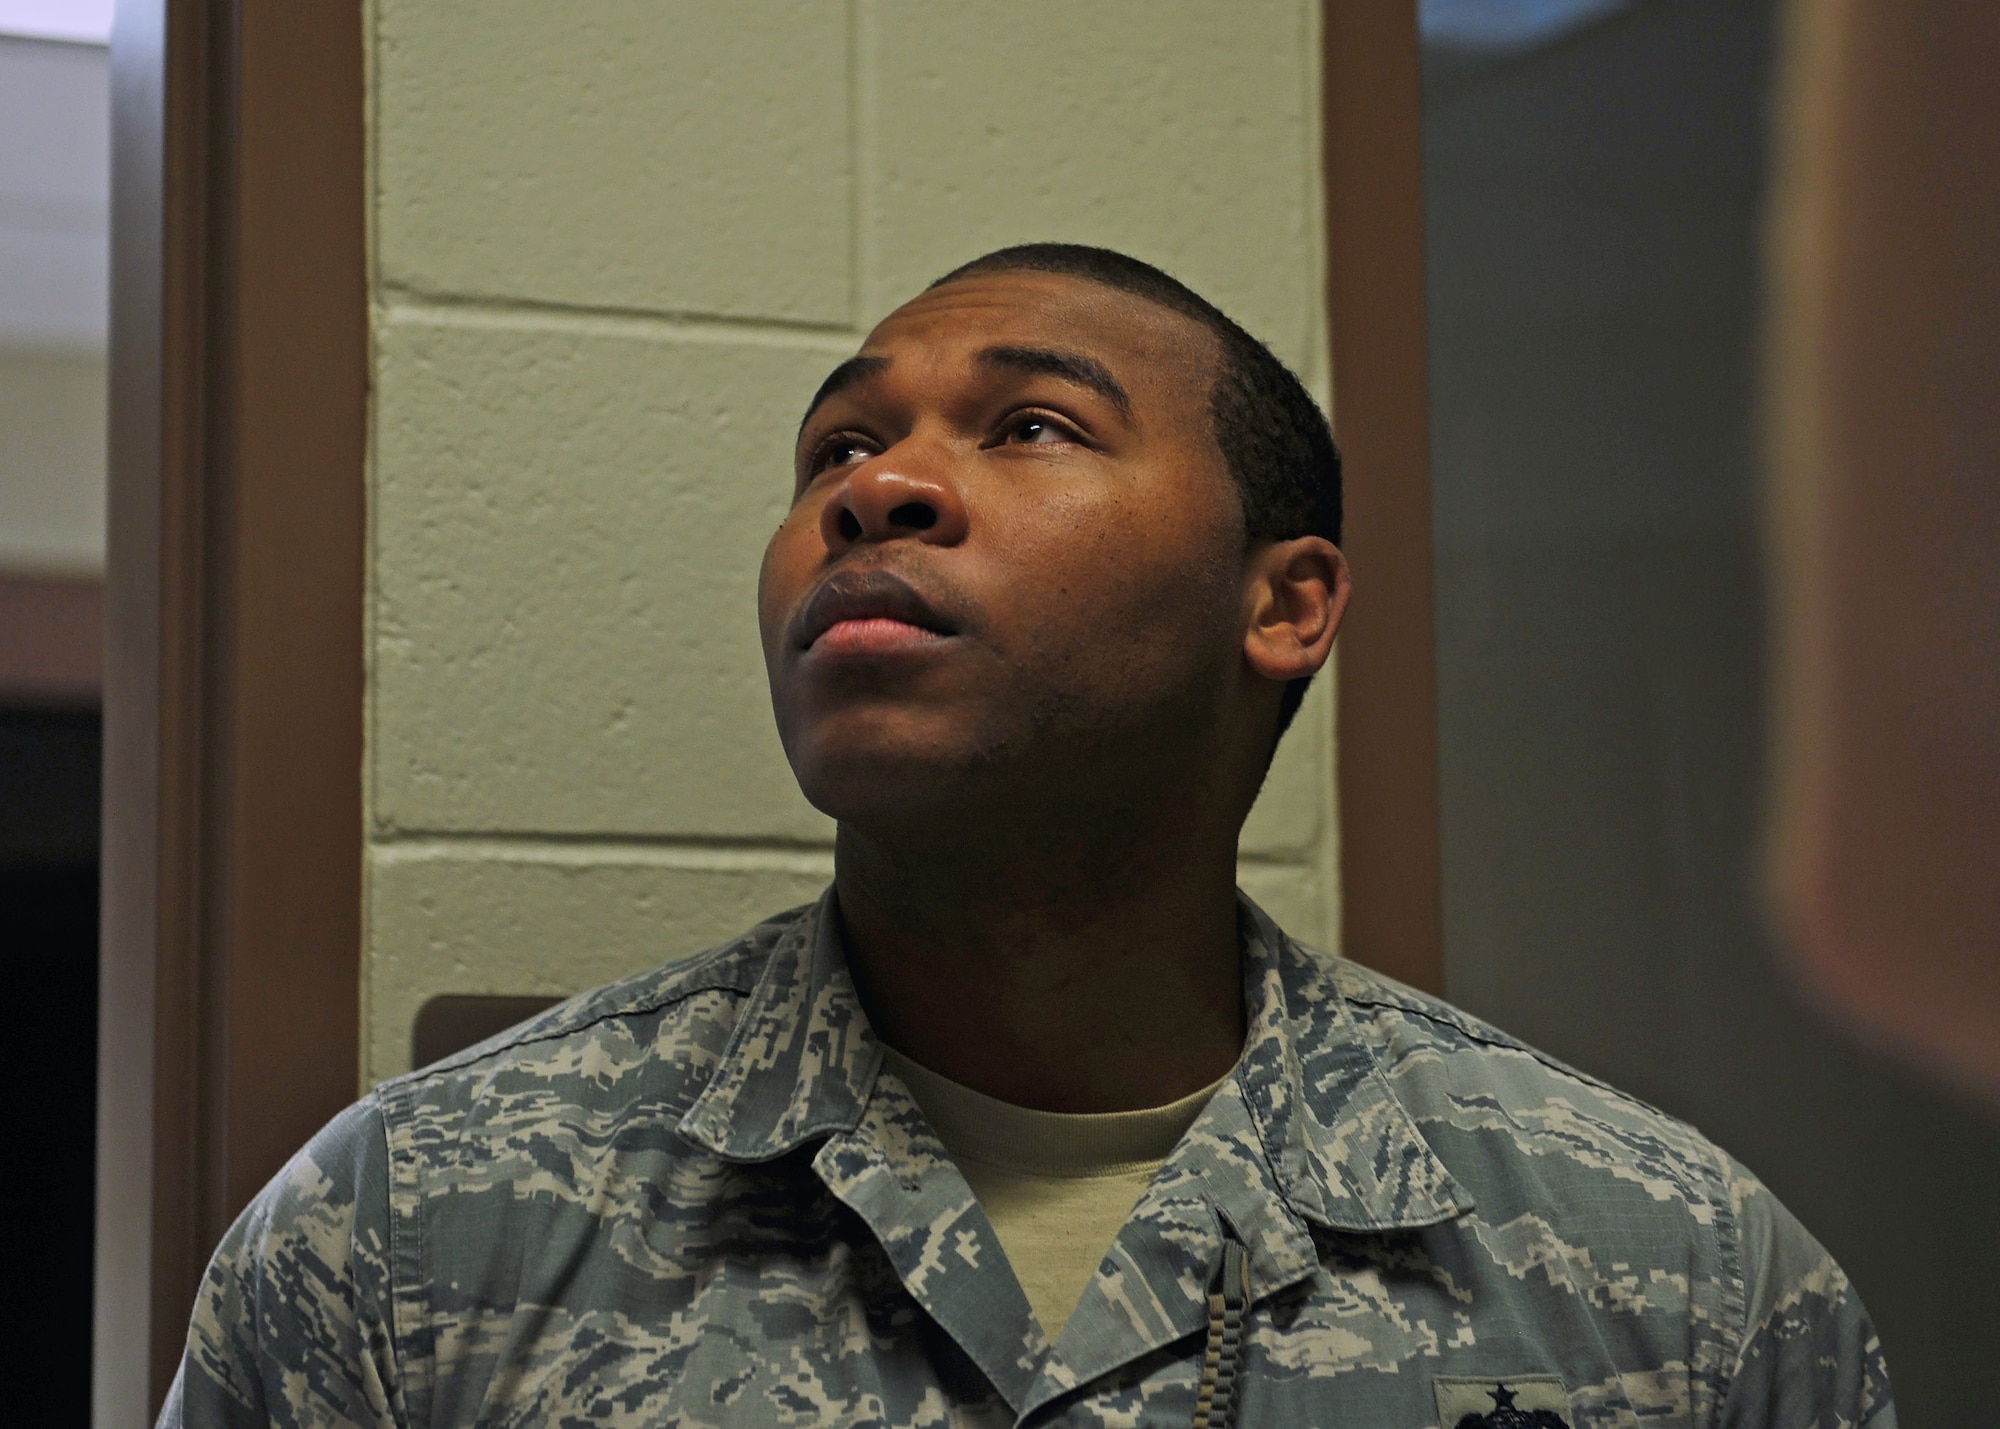 Staff Sgt. Ali Williams, 27th Special Operations Security Forces Squadron confinement NCO in-charge, reads over the rules of confinement at the 27th SOSFS compound April 13, 2016 at Cannon Air Force Base, N.M. Upon arriving at the confinement section for in-processing, inmates are required to read the rules aloud for the NCOIC to hear. (U.S. Air Force photo/Staff Sgt. Whitney Amstutz)